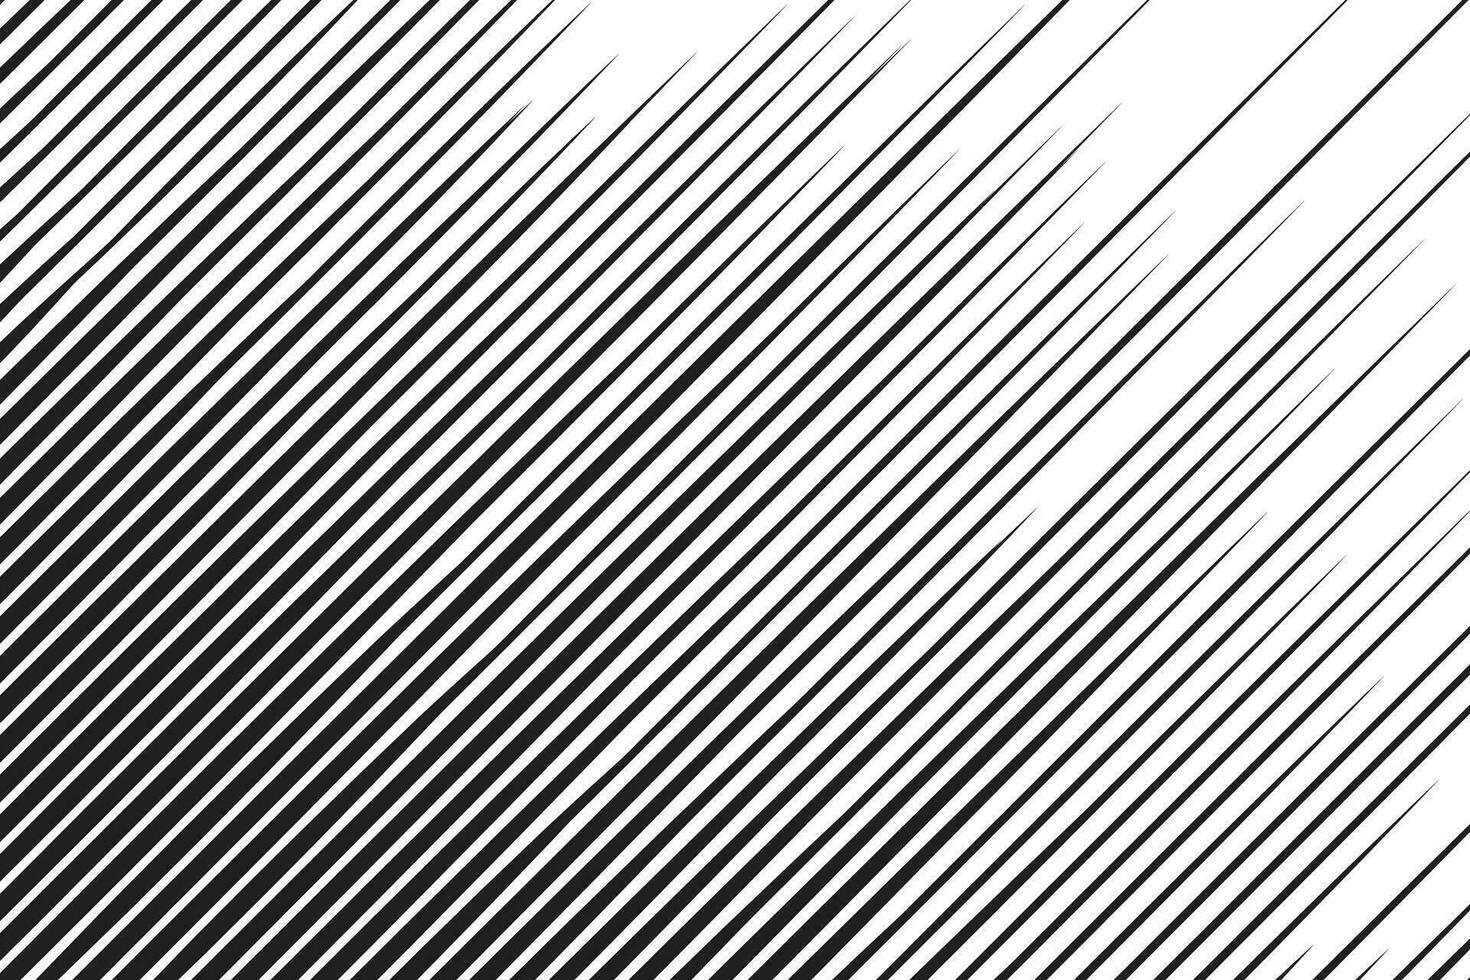 Hand Drawn Comic Abstract Motion Speed Line Zoom Effect Backgroundd vector